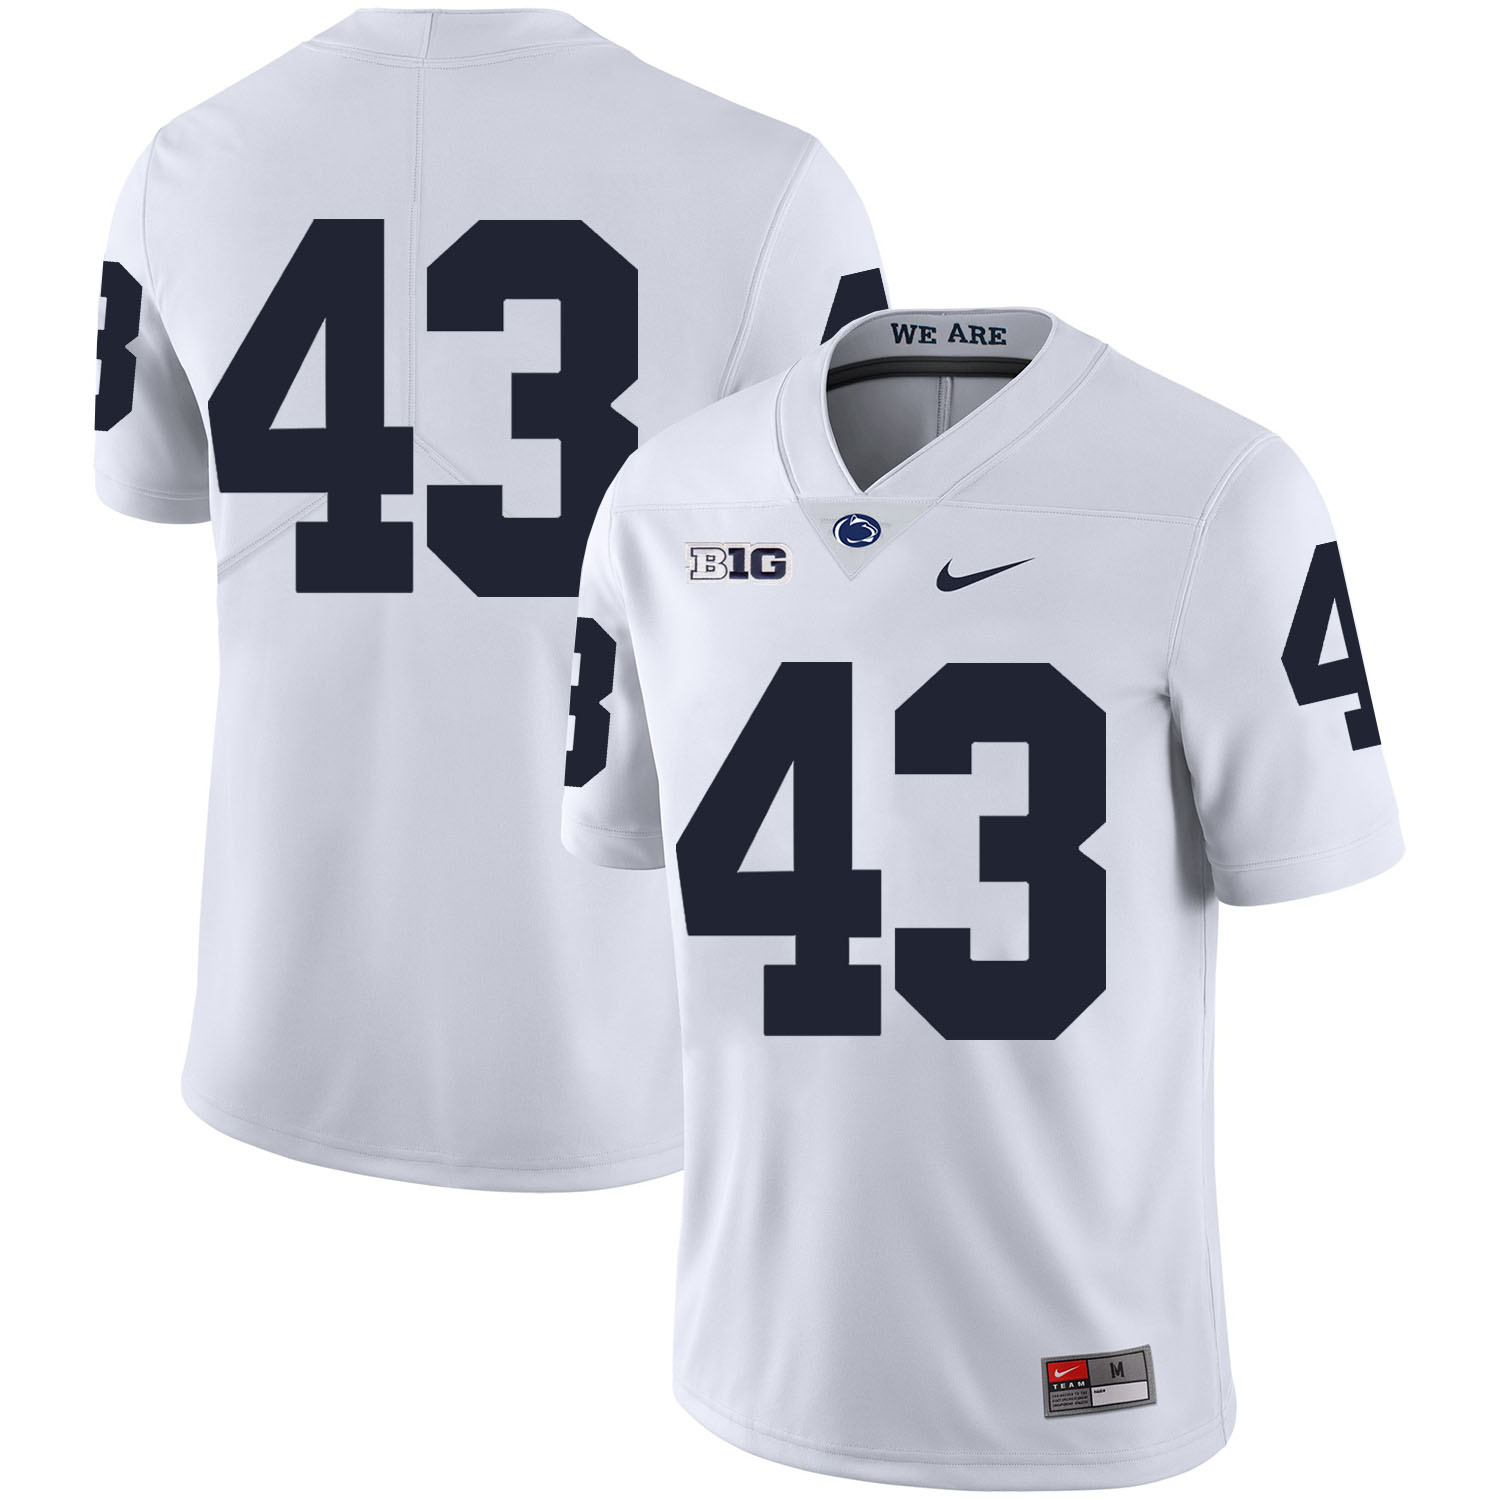 Penn State Nittany Lions 43 Mike Hull White Nike College Football Jersey